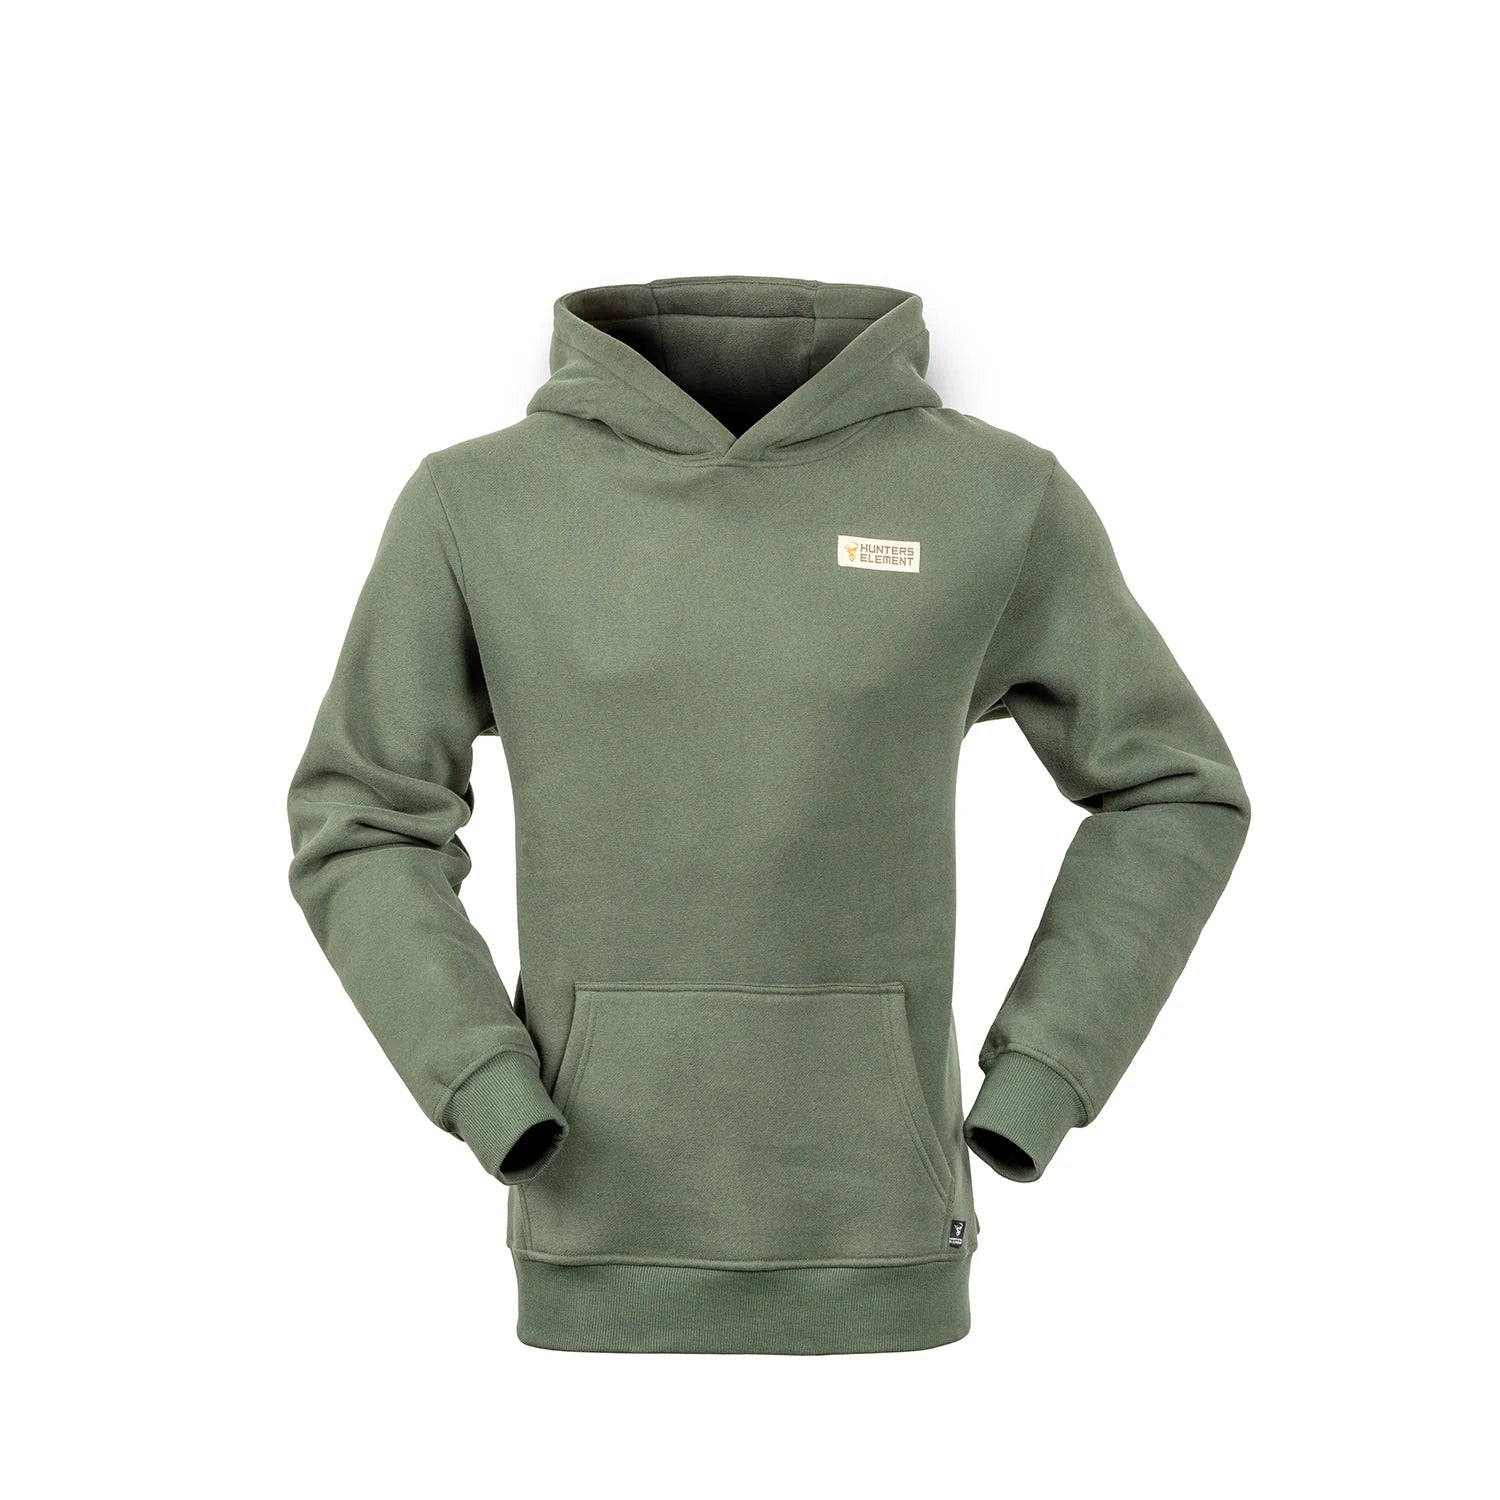 Hunters Element Classic Hoodie - S / MOUNTAIN GREEN - Mansfield Hunting & Fishing - Products to prepare for Corona Virus